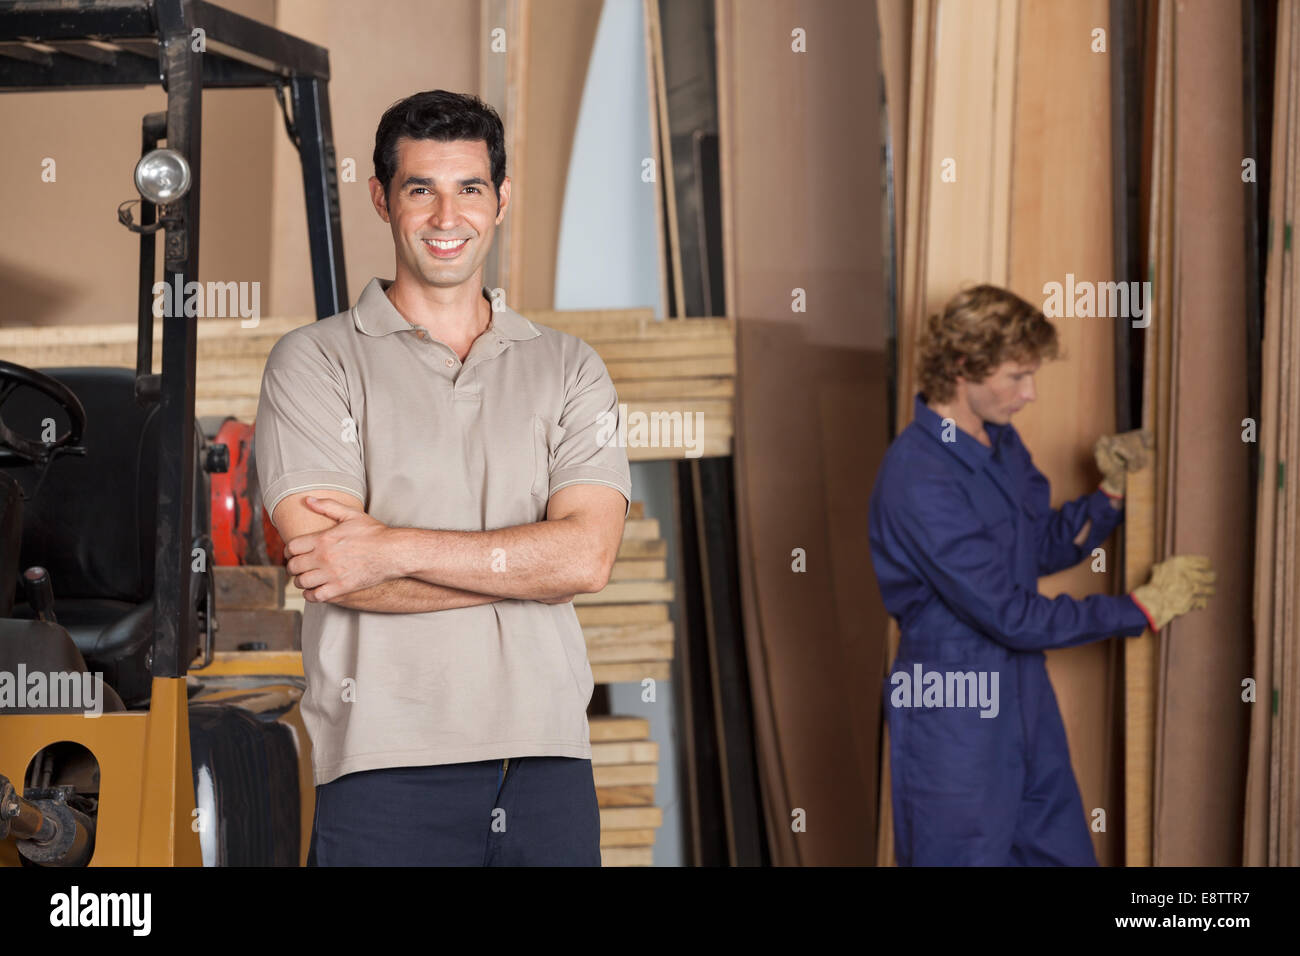 Carpenter With Arms Crossed In Workshop Stock Photo